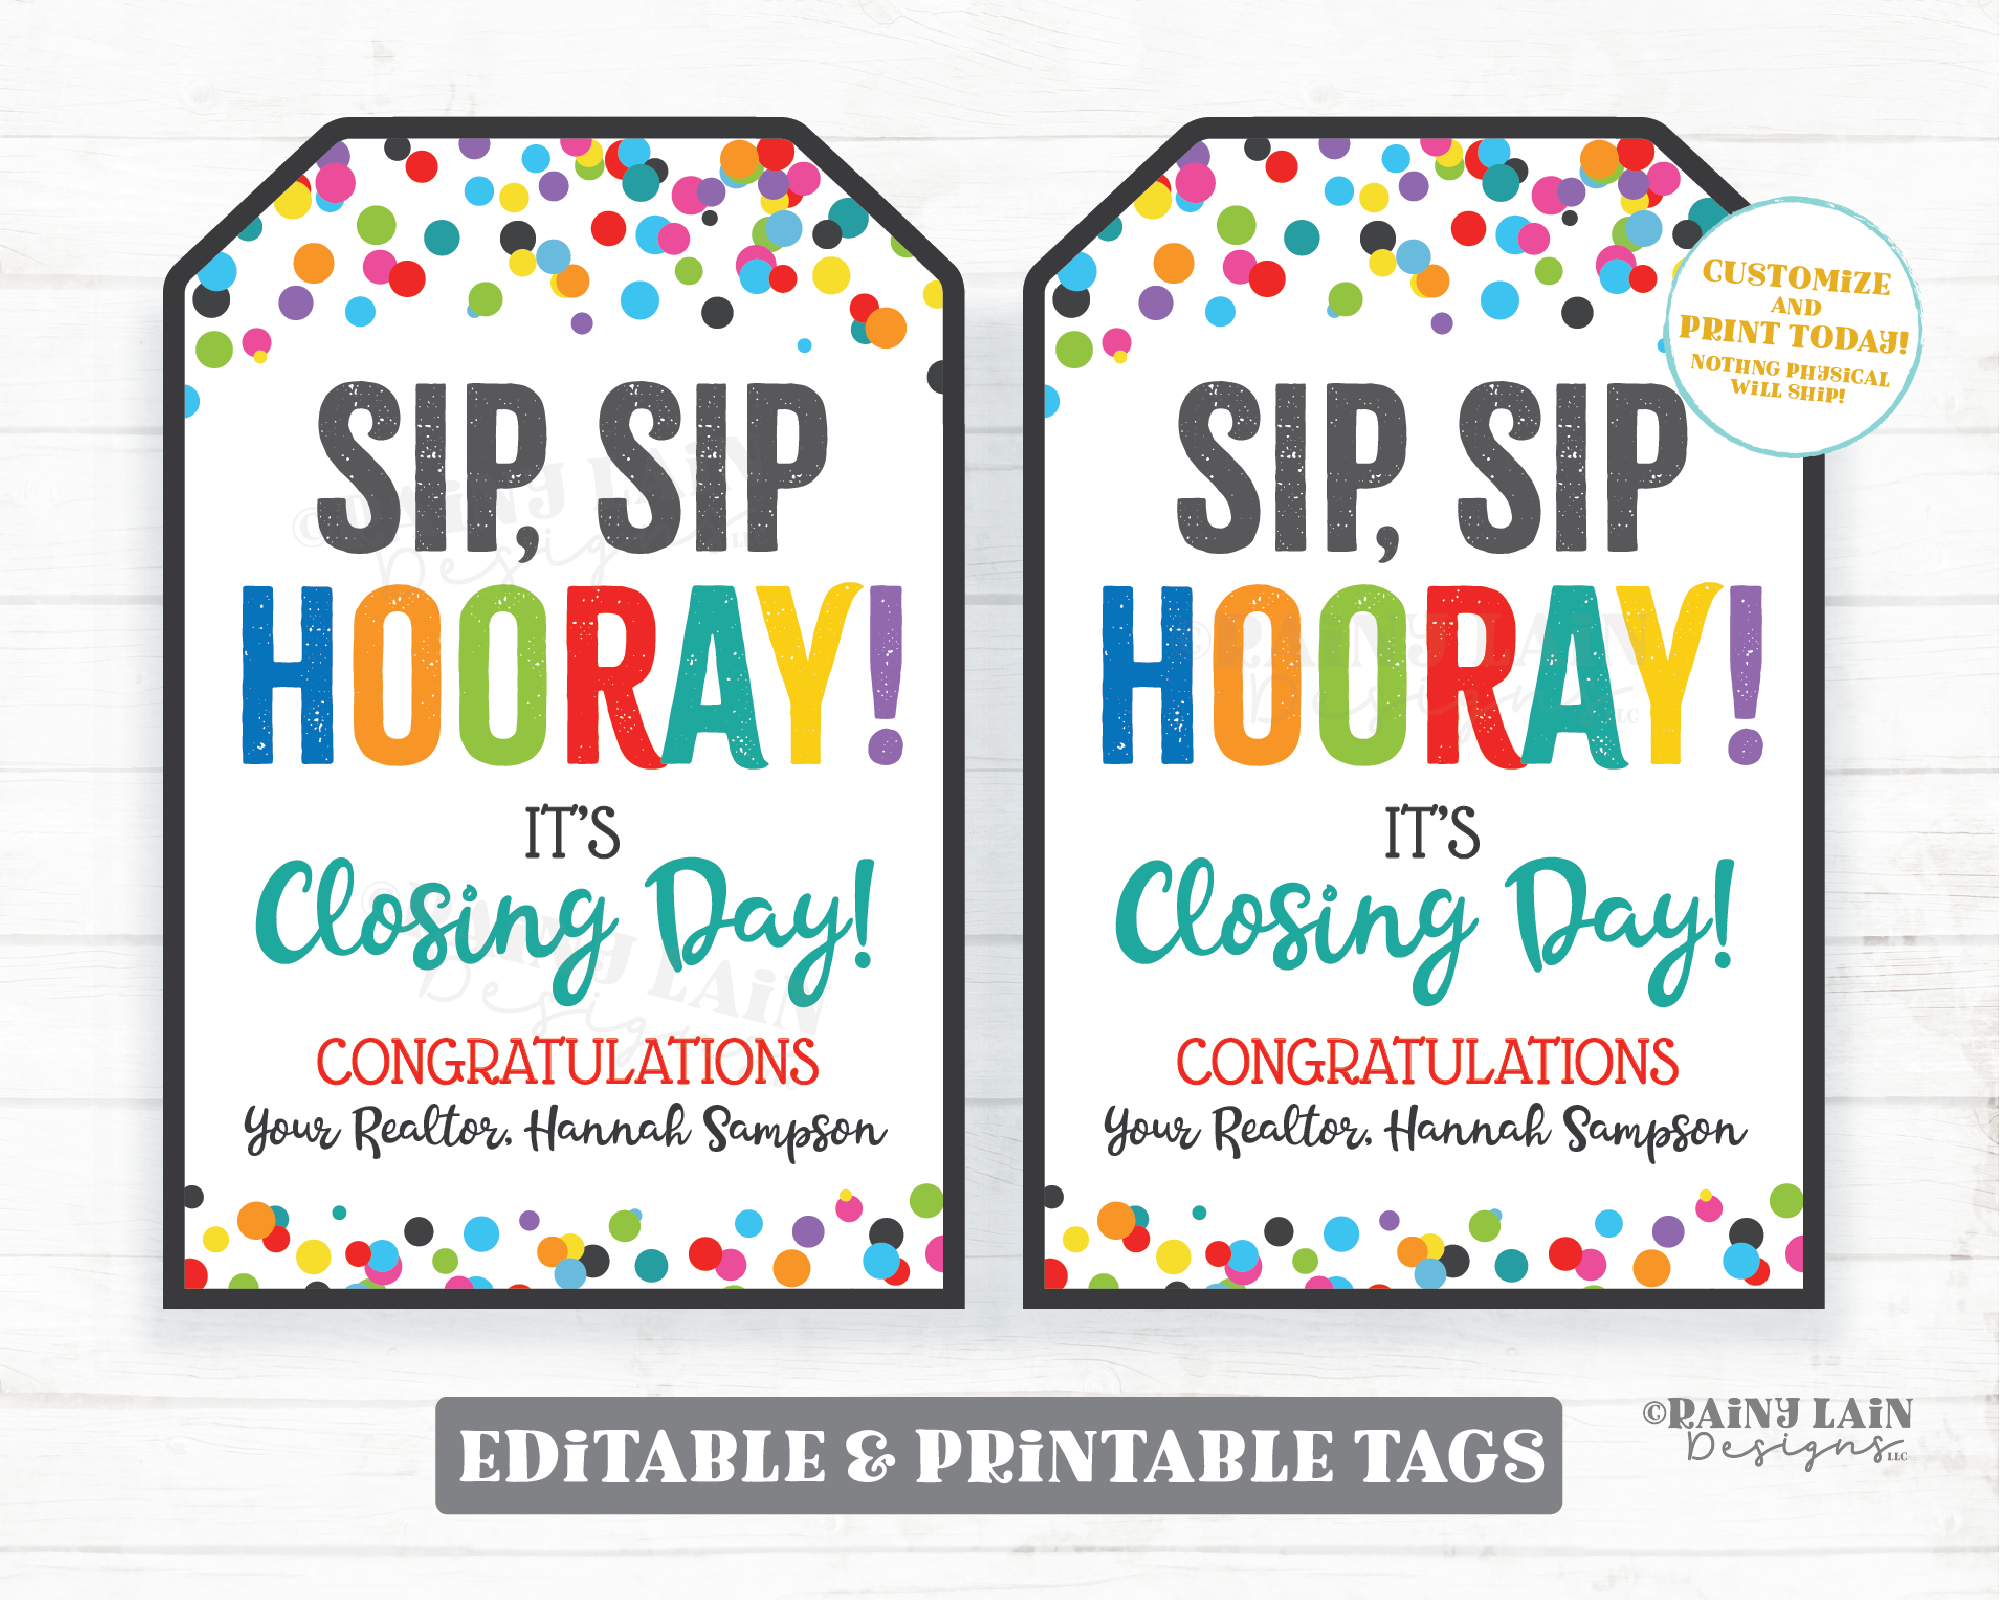 Sip Sip Hooray It's Closing Day Tags Realtor Client Gift Wine Spirits Alcohol Reusable Straw Cup Mug Congratulations New Home Printable